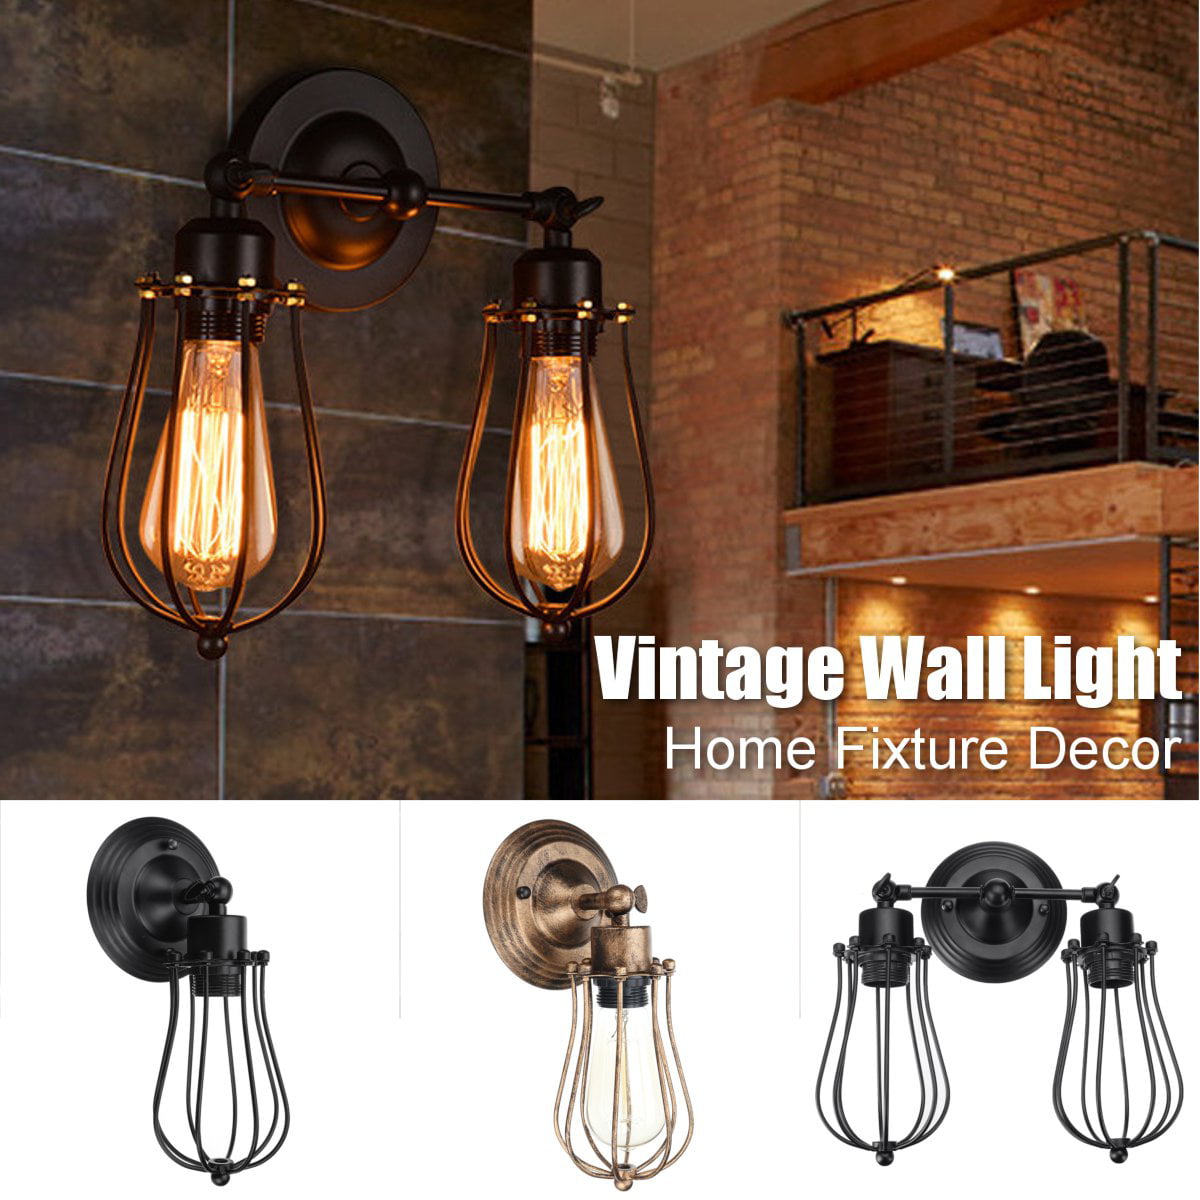 Vintage Retro Industrial Loft Rustic Wall Sconce Cage Wall Lights Porch Lamp UK 